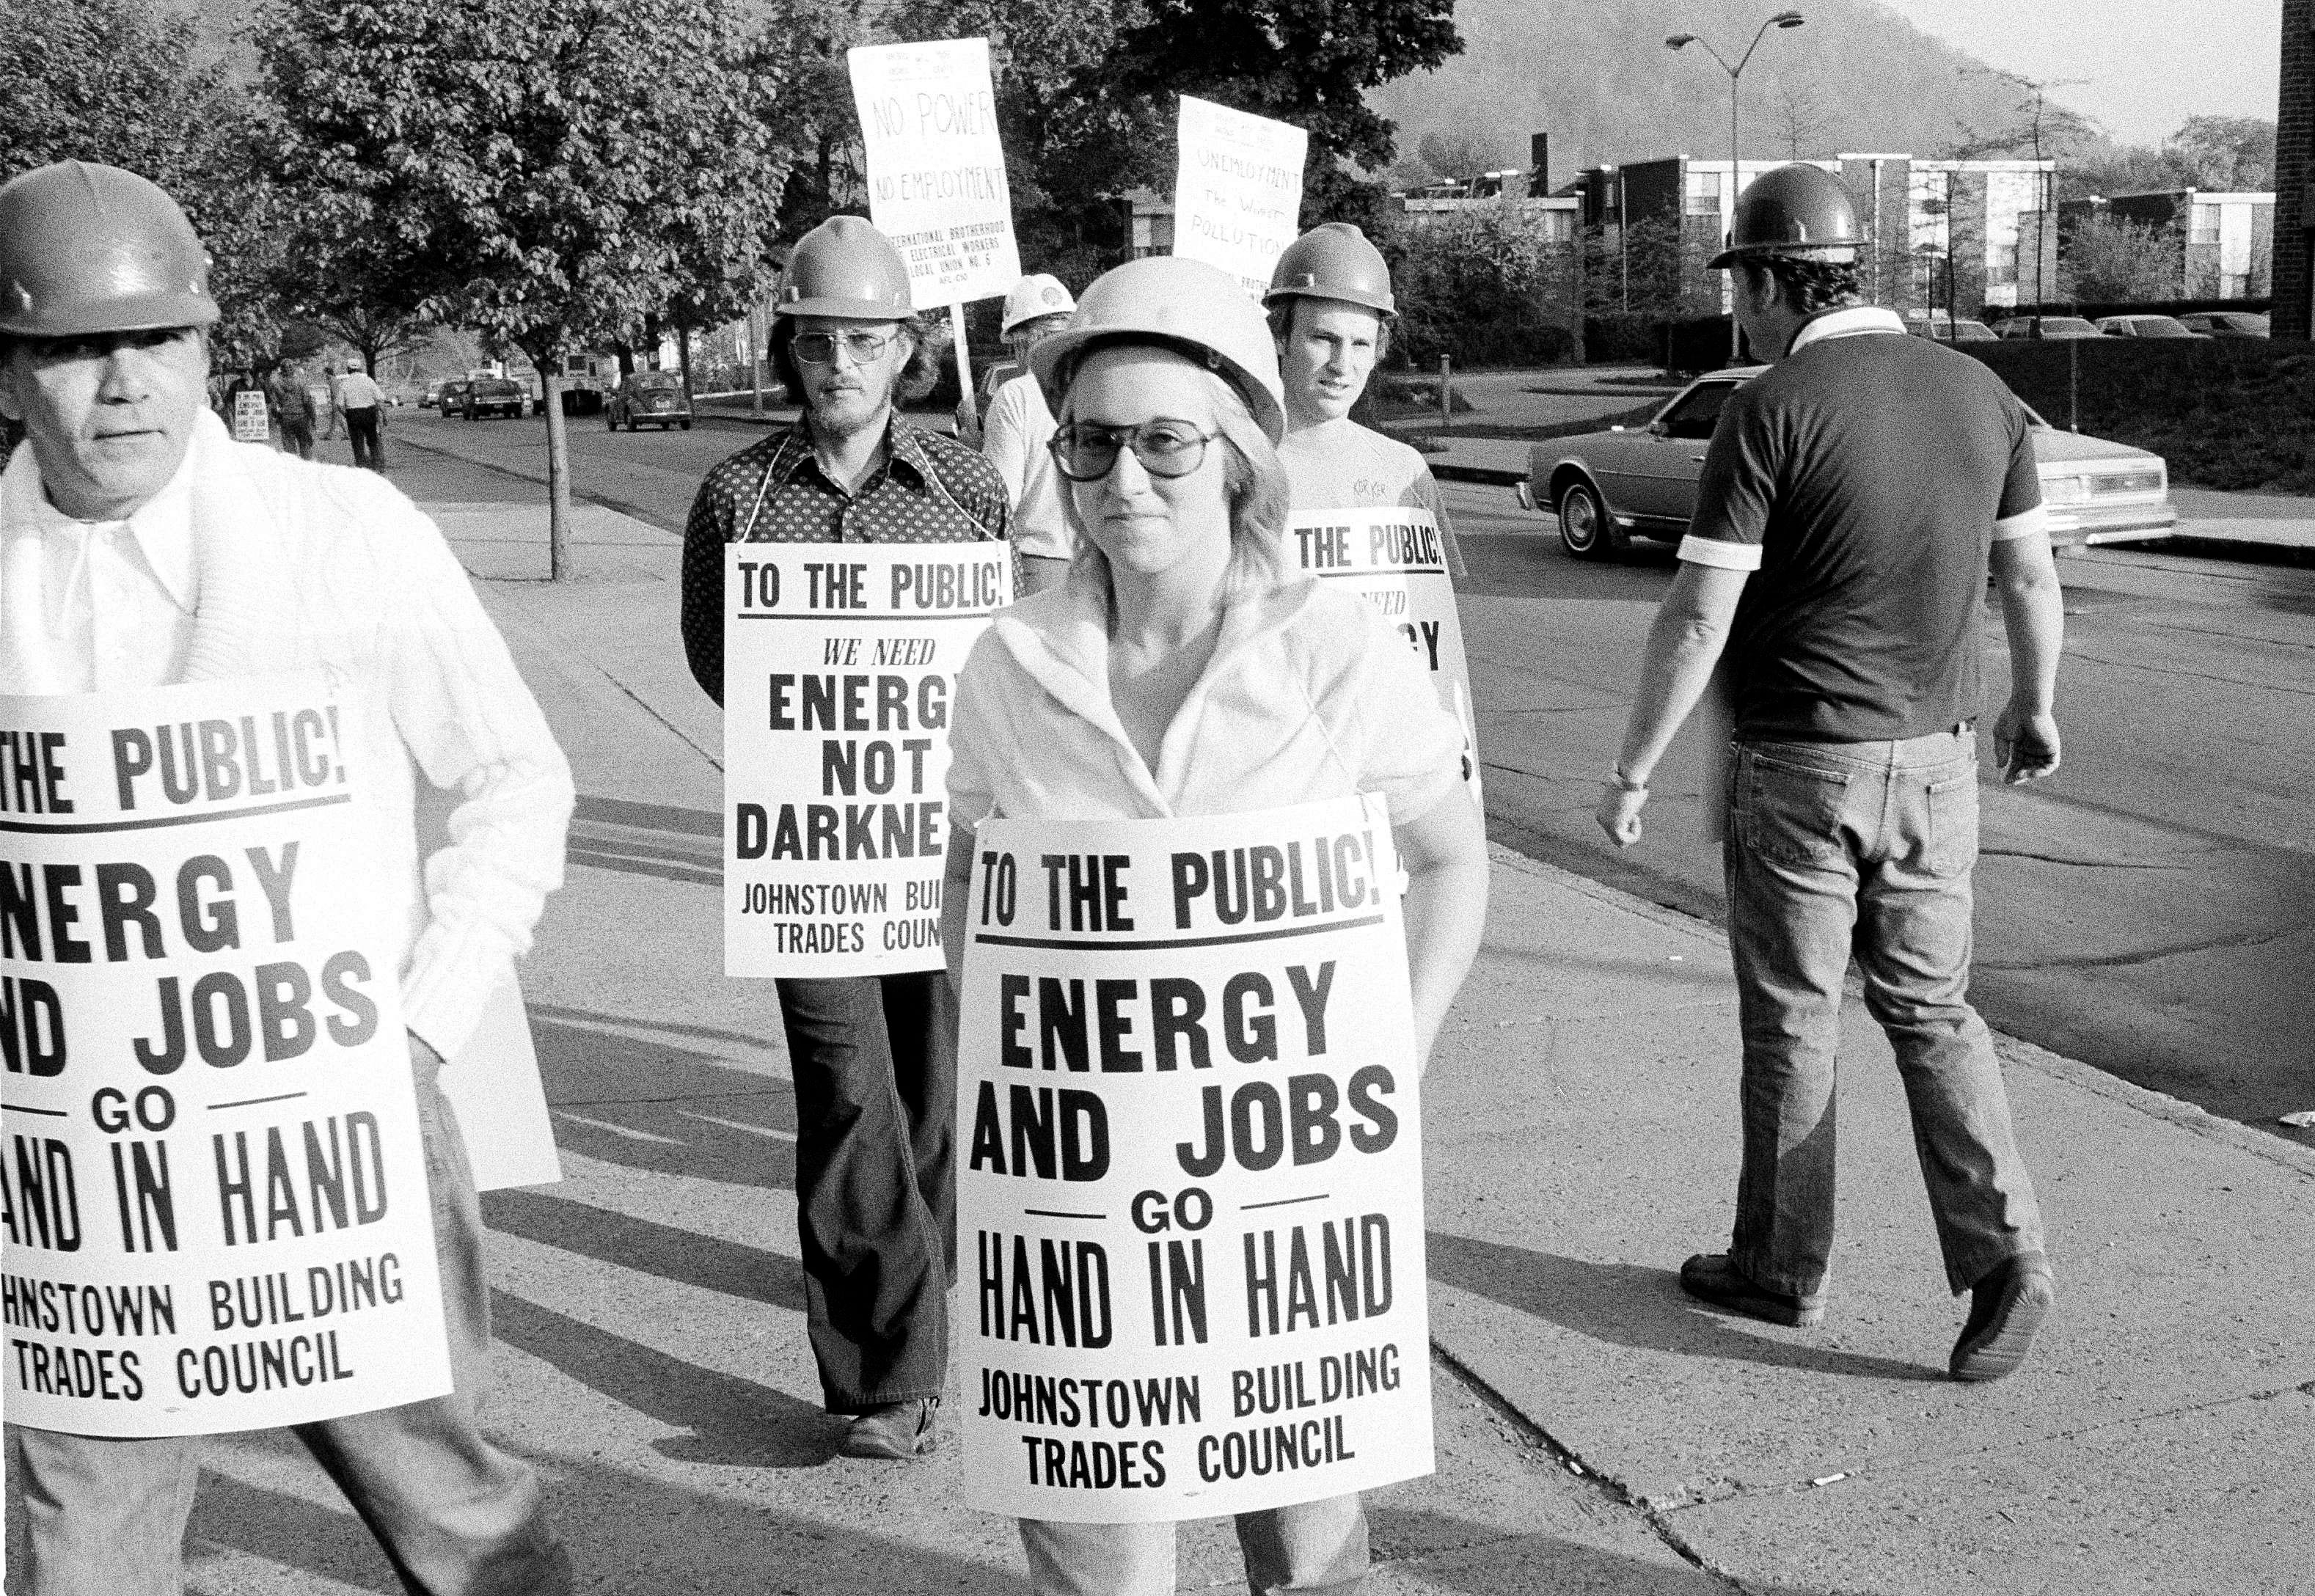 Members of the International Brotherhood of Electrical Workers march in support of nuclear power plants outside the Johnstown War Memorial Arena, May 9, 1979. The annual stockholders' meeting of the General Public Utilities (GPU) is to be held in Johnstown on Wednesday. GPU is the parent company for Metropolitan Edison, the owners of the nuclear plant at Three Mile Island near Harrisburg, Penn. (AP Photo)